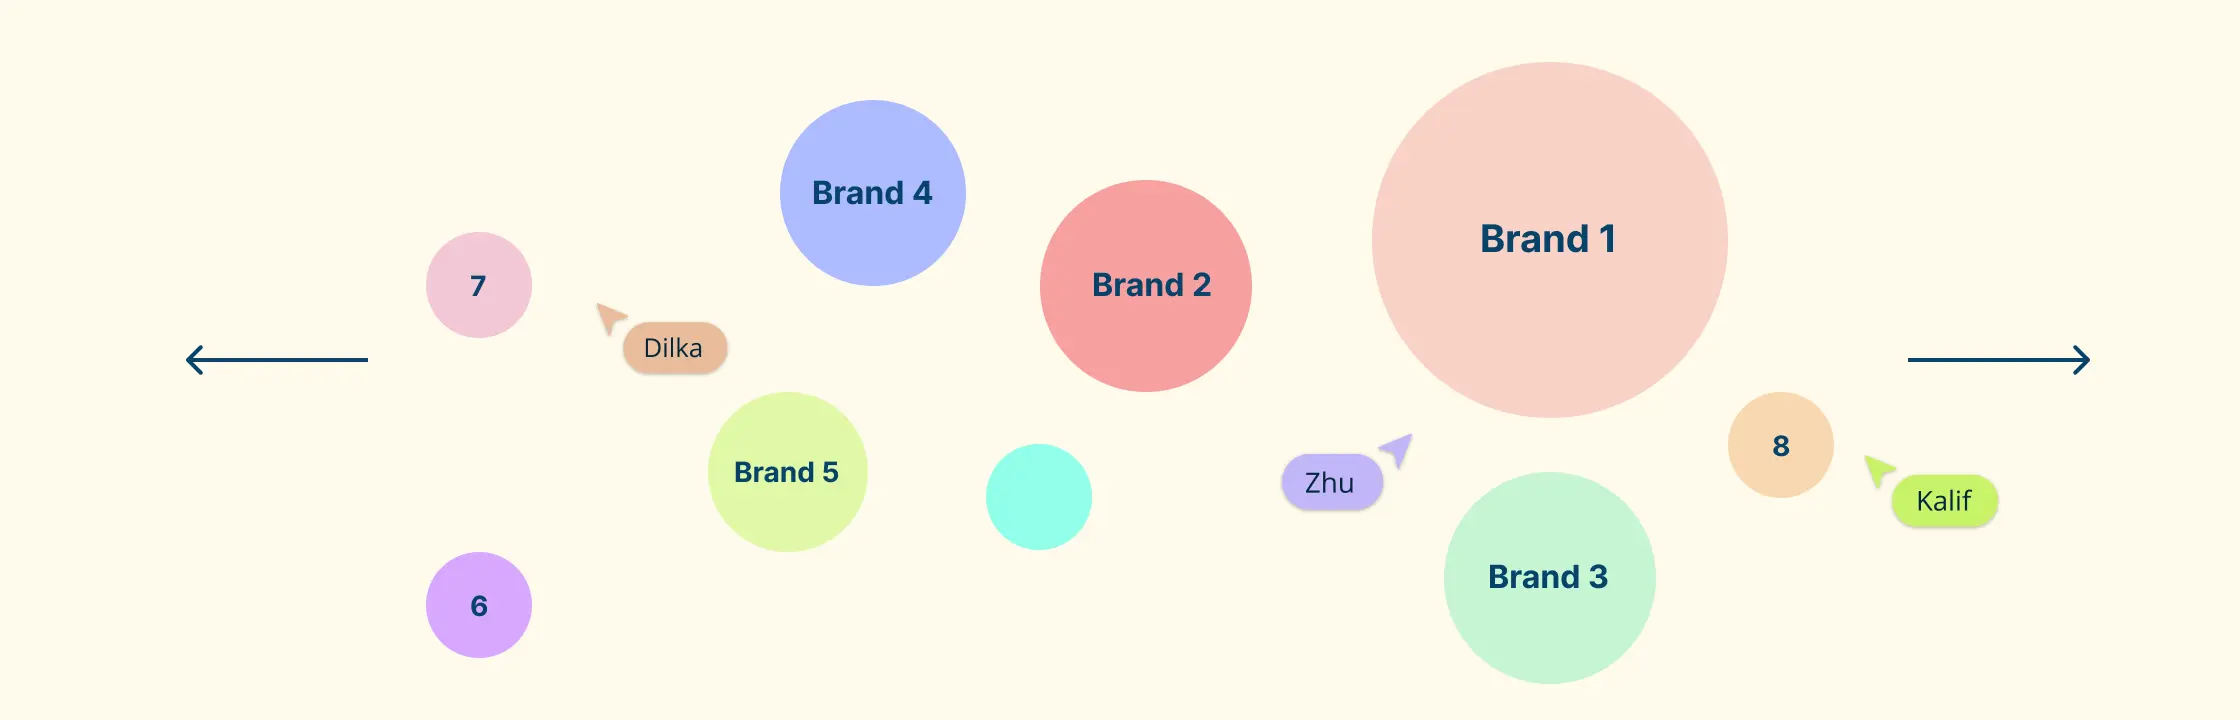 How to Create a Brand Positioning Map in 7 Steps